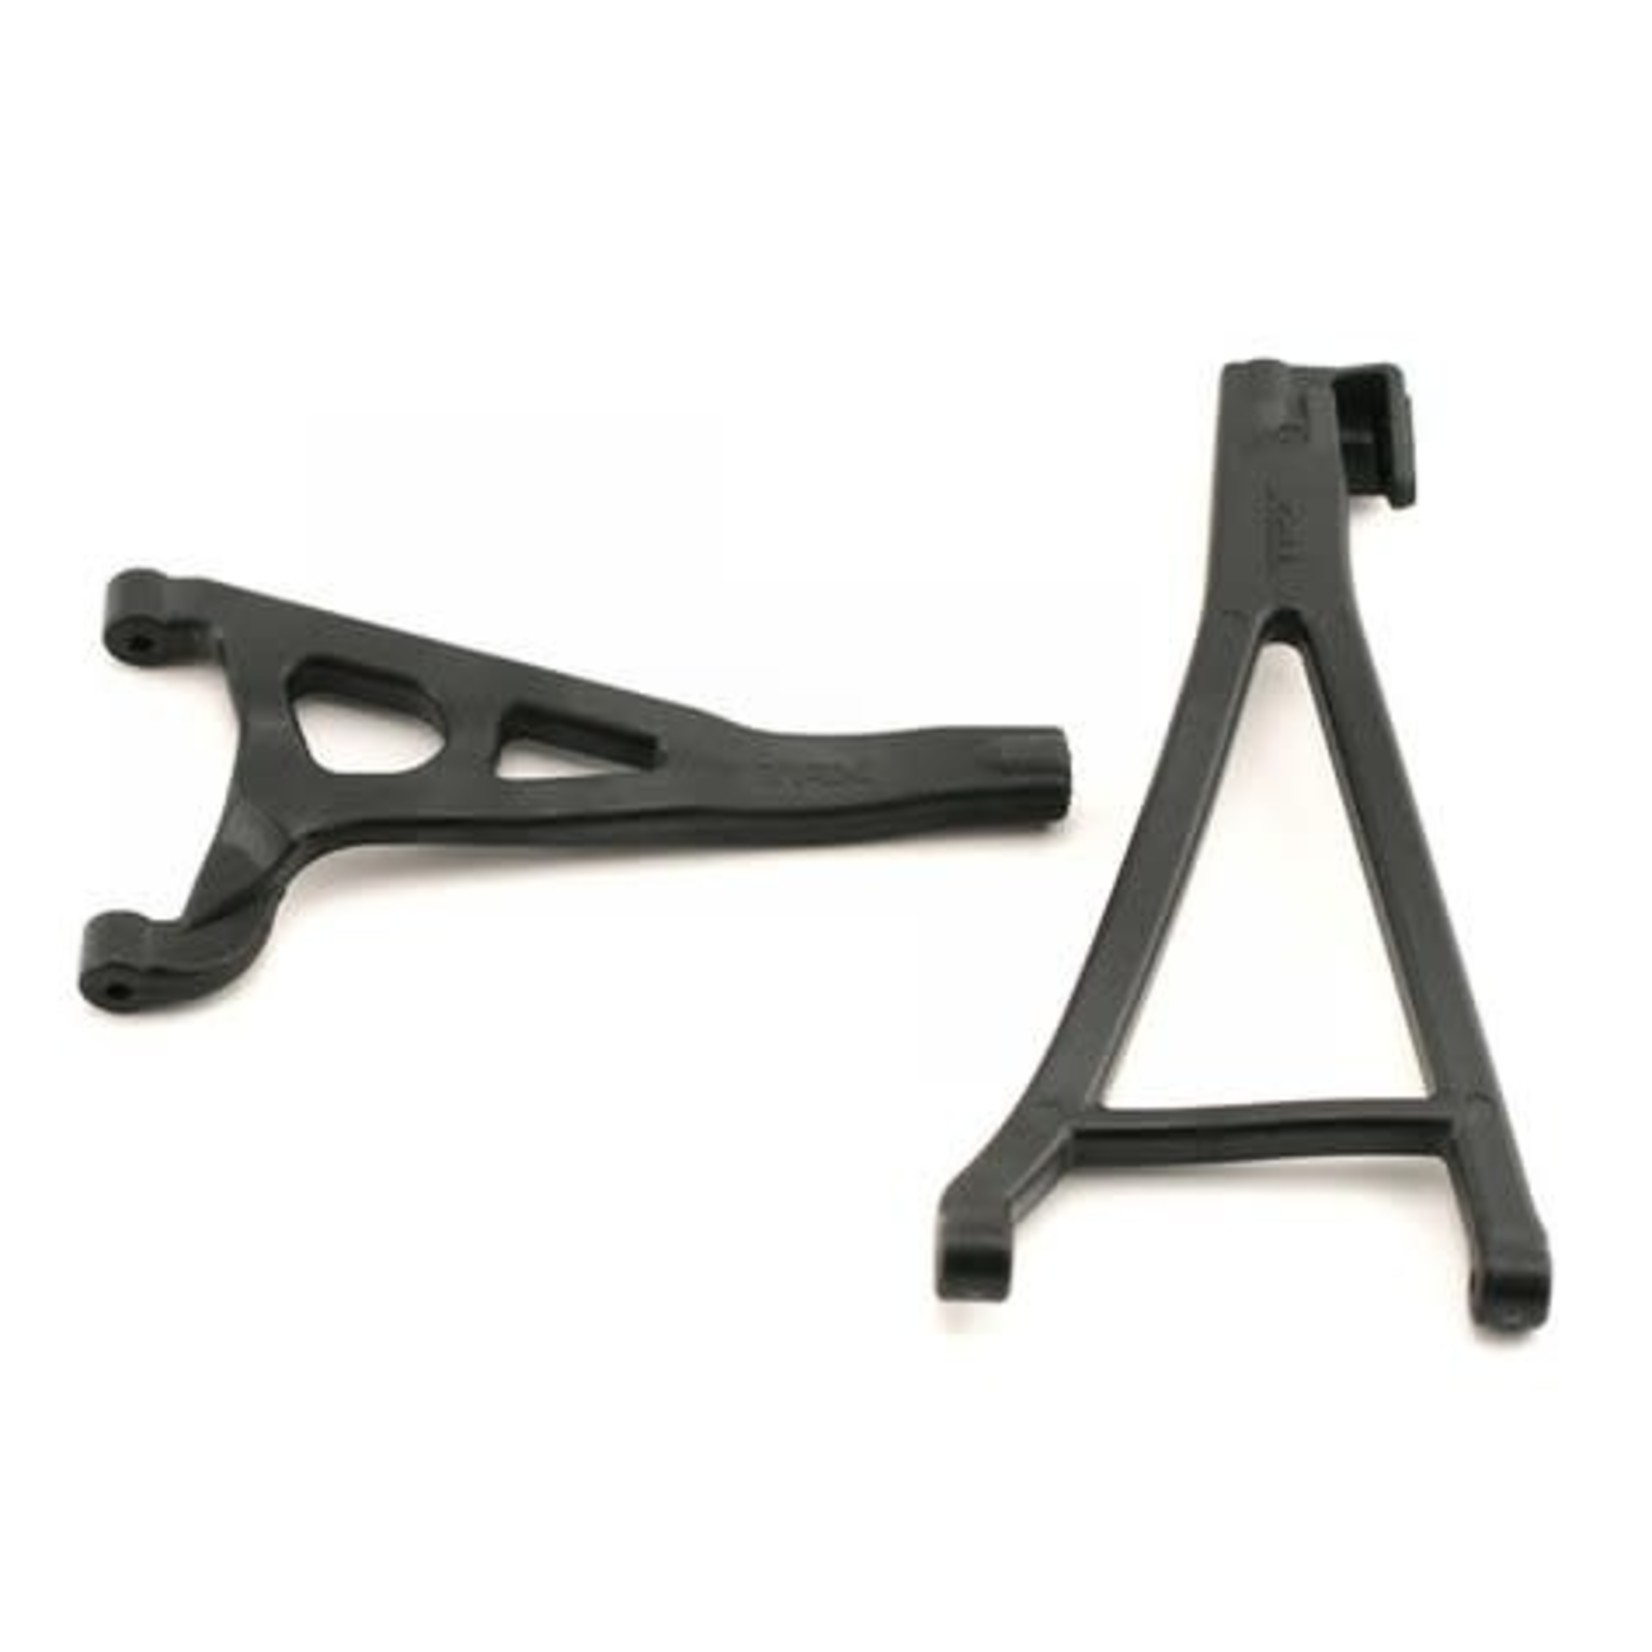 Traxxas Traxxas Revo Suspension Arms Left Front Upper/Lower #5332